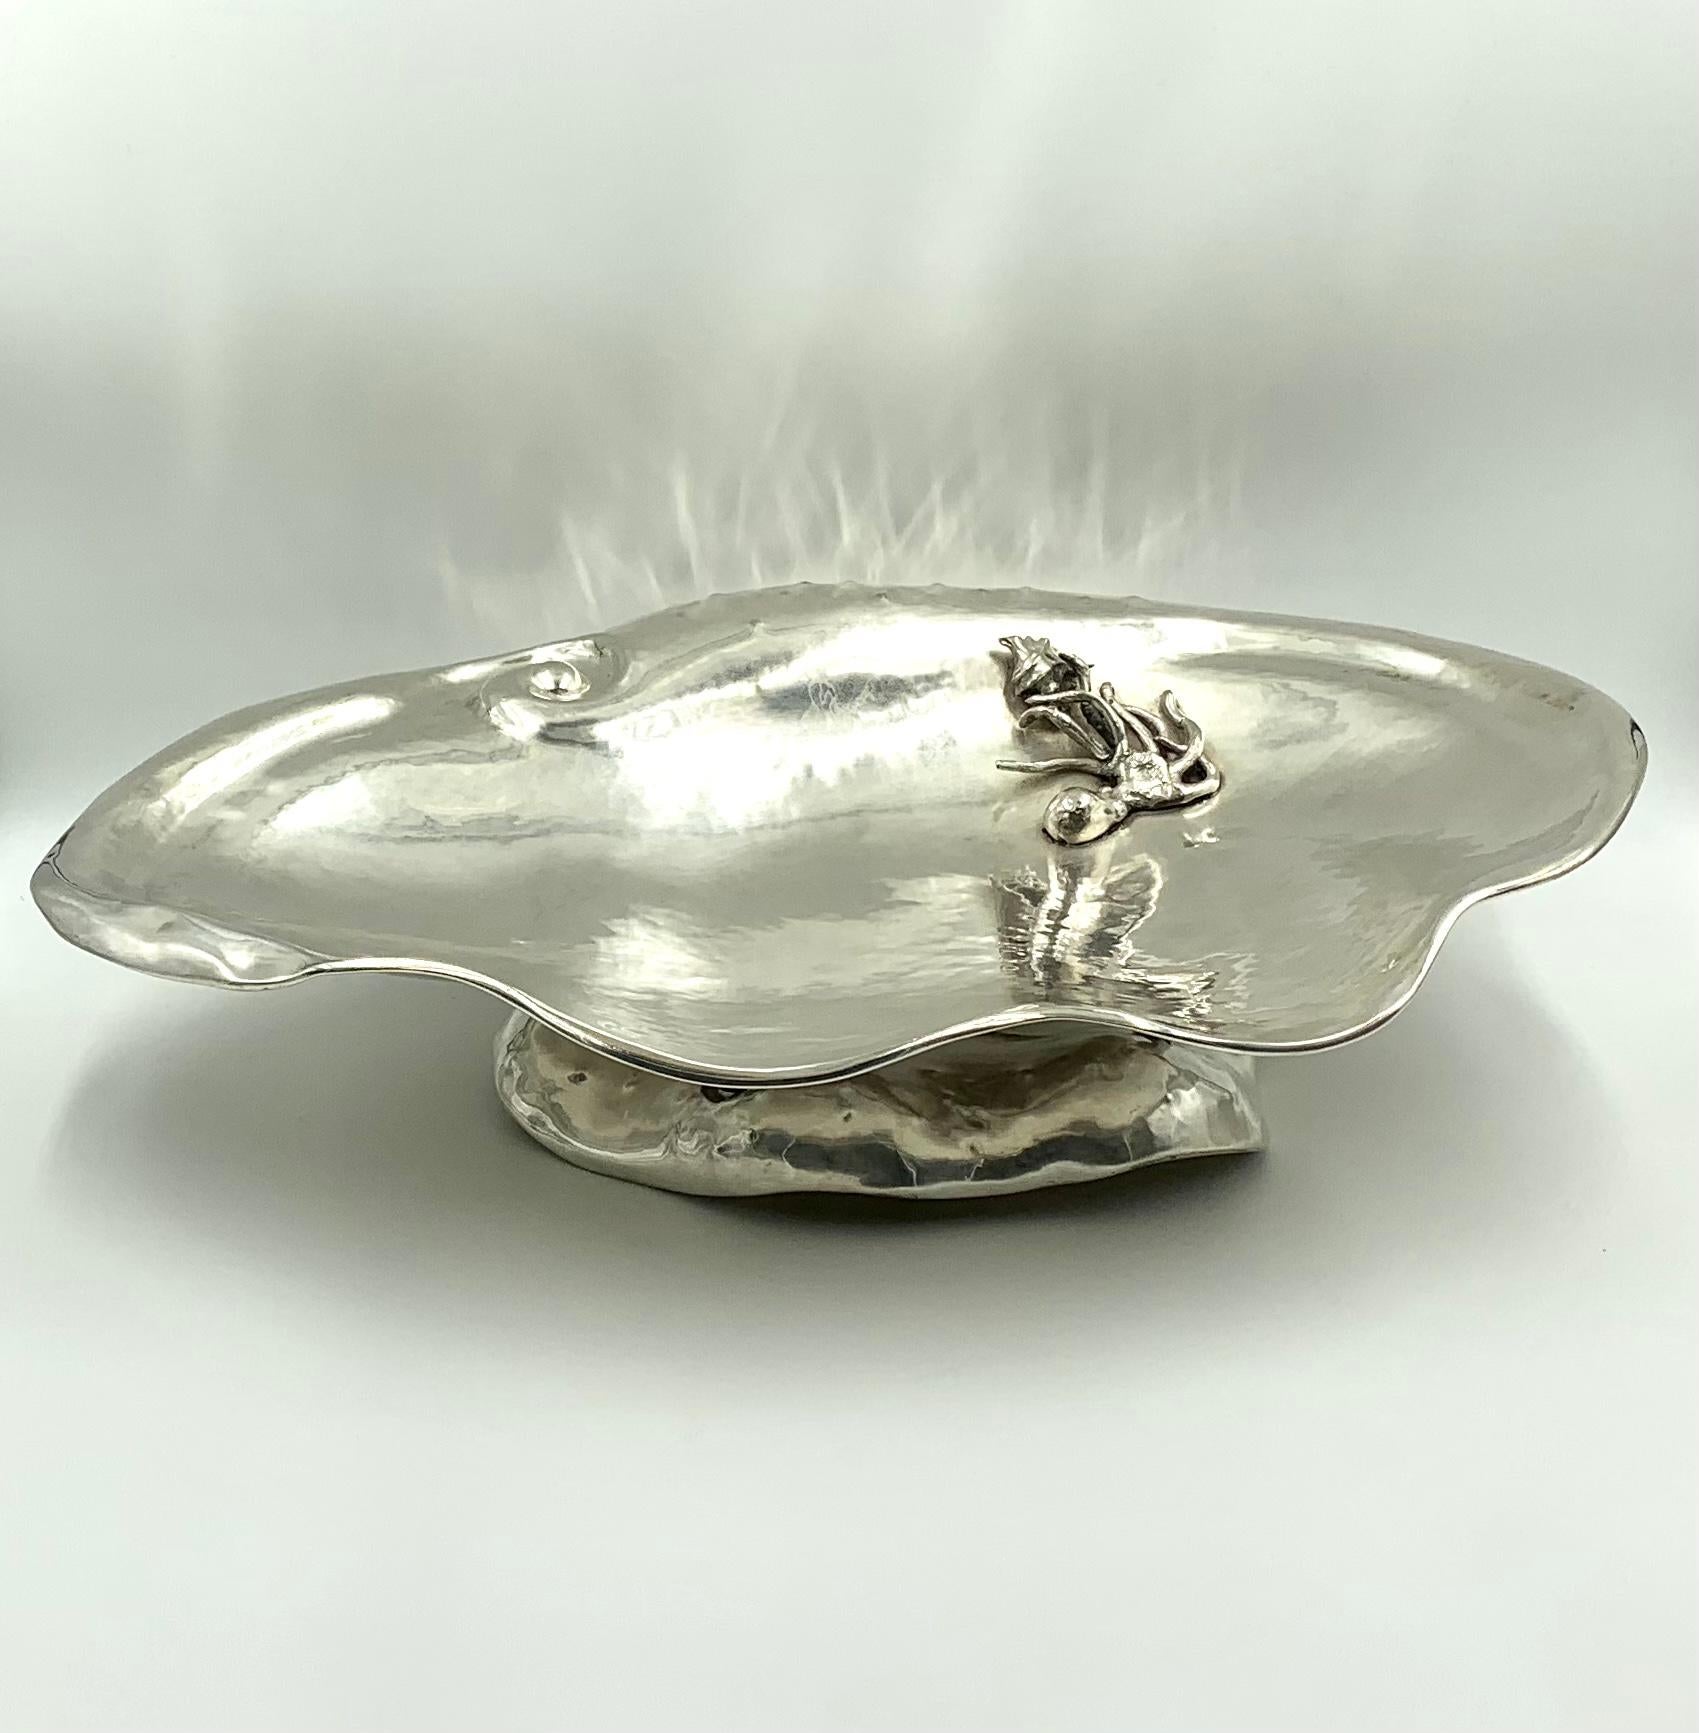 Spectacular, very large MCM Italian silver giant clam shell centerpiece. 
Fabulous for serving oysters, lobster, calamari and other Frutti di Mare. 
Hand hammered, finely hand chased, superb quality on par with Buccellati. Marvelous sculptural